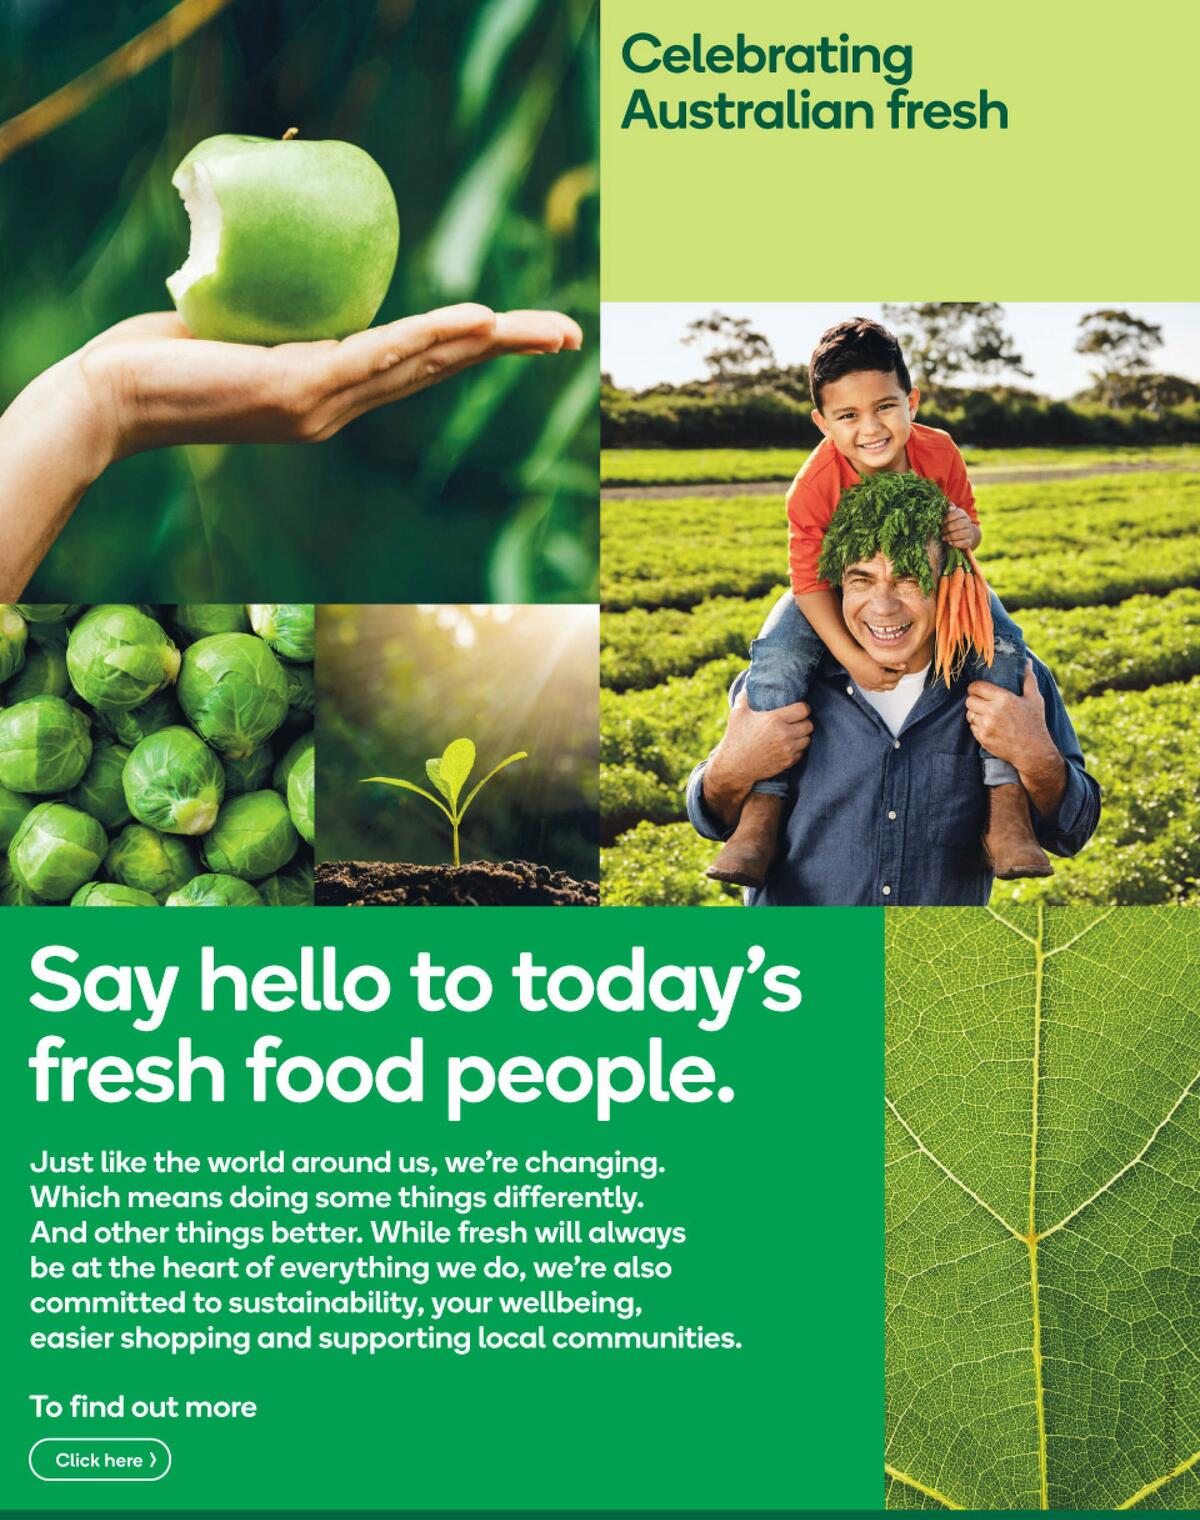 Woolworths Catalogues from 8 September